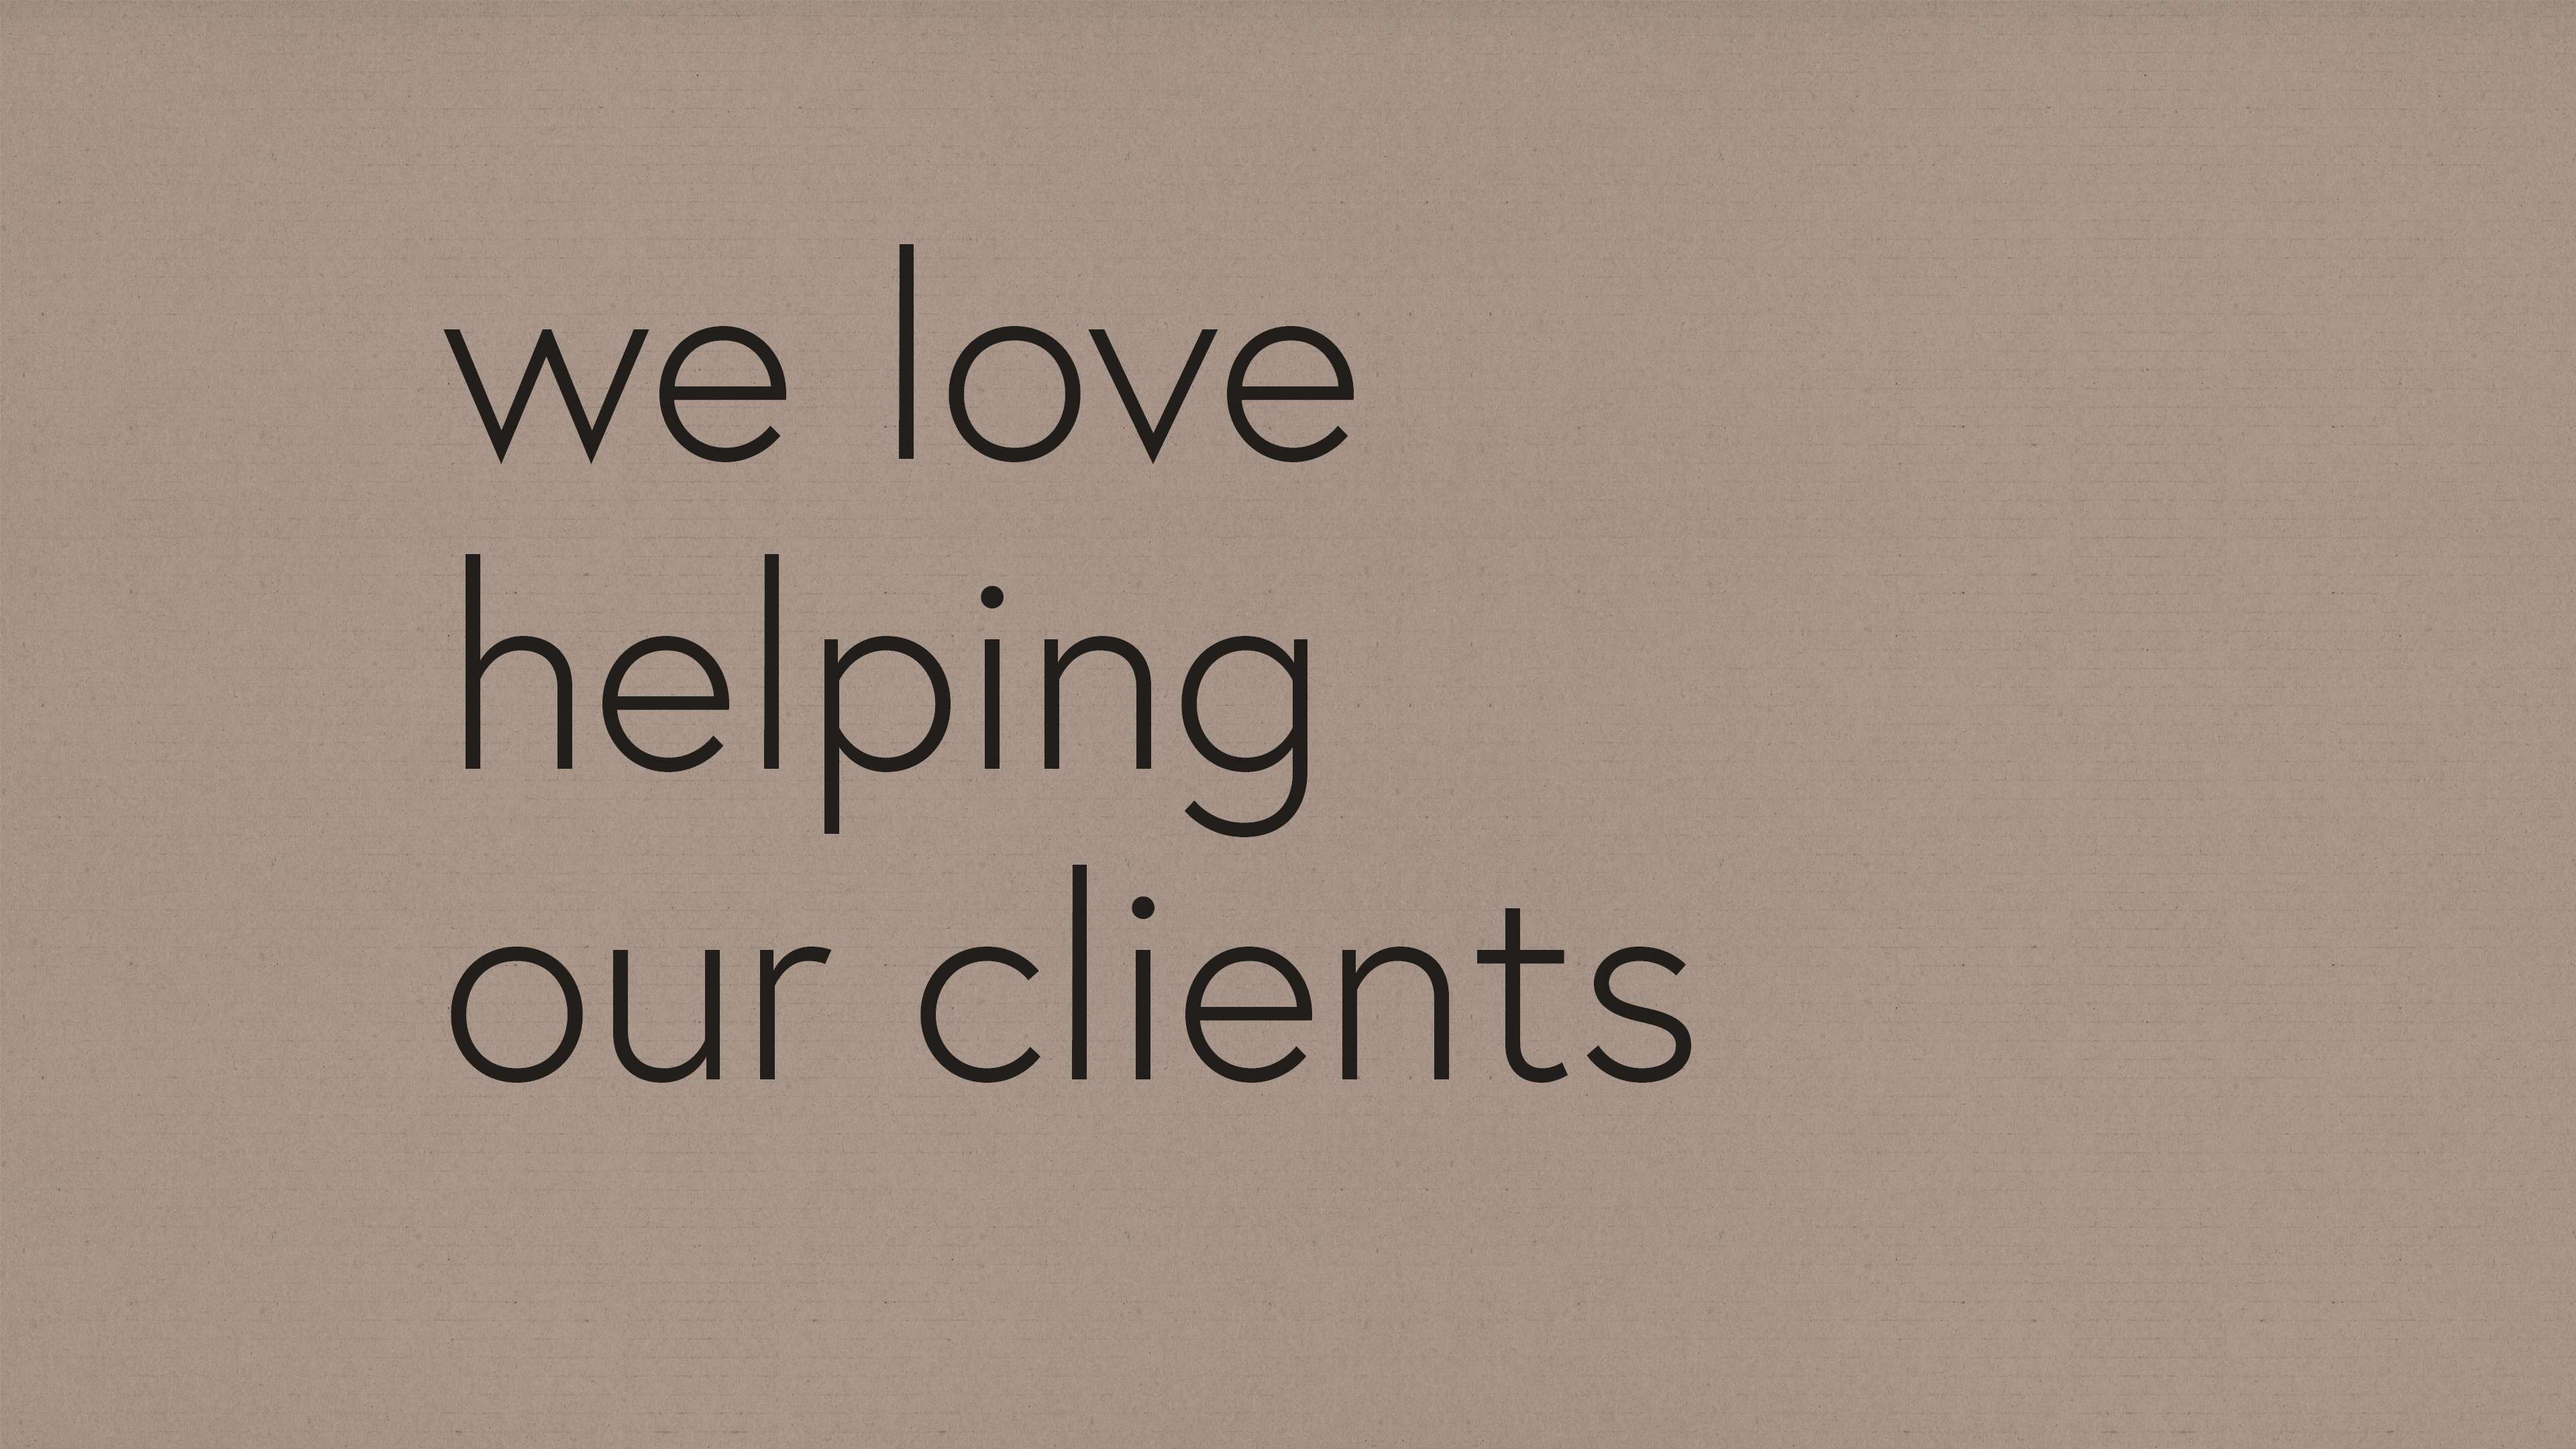 We love helping our clients - Saunders Design Group